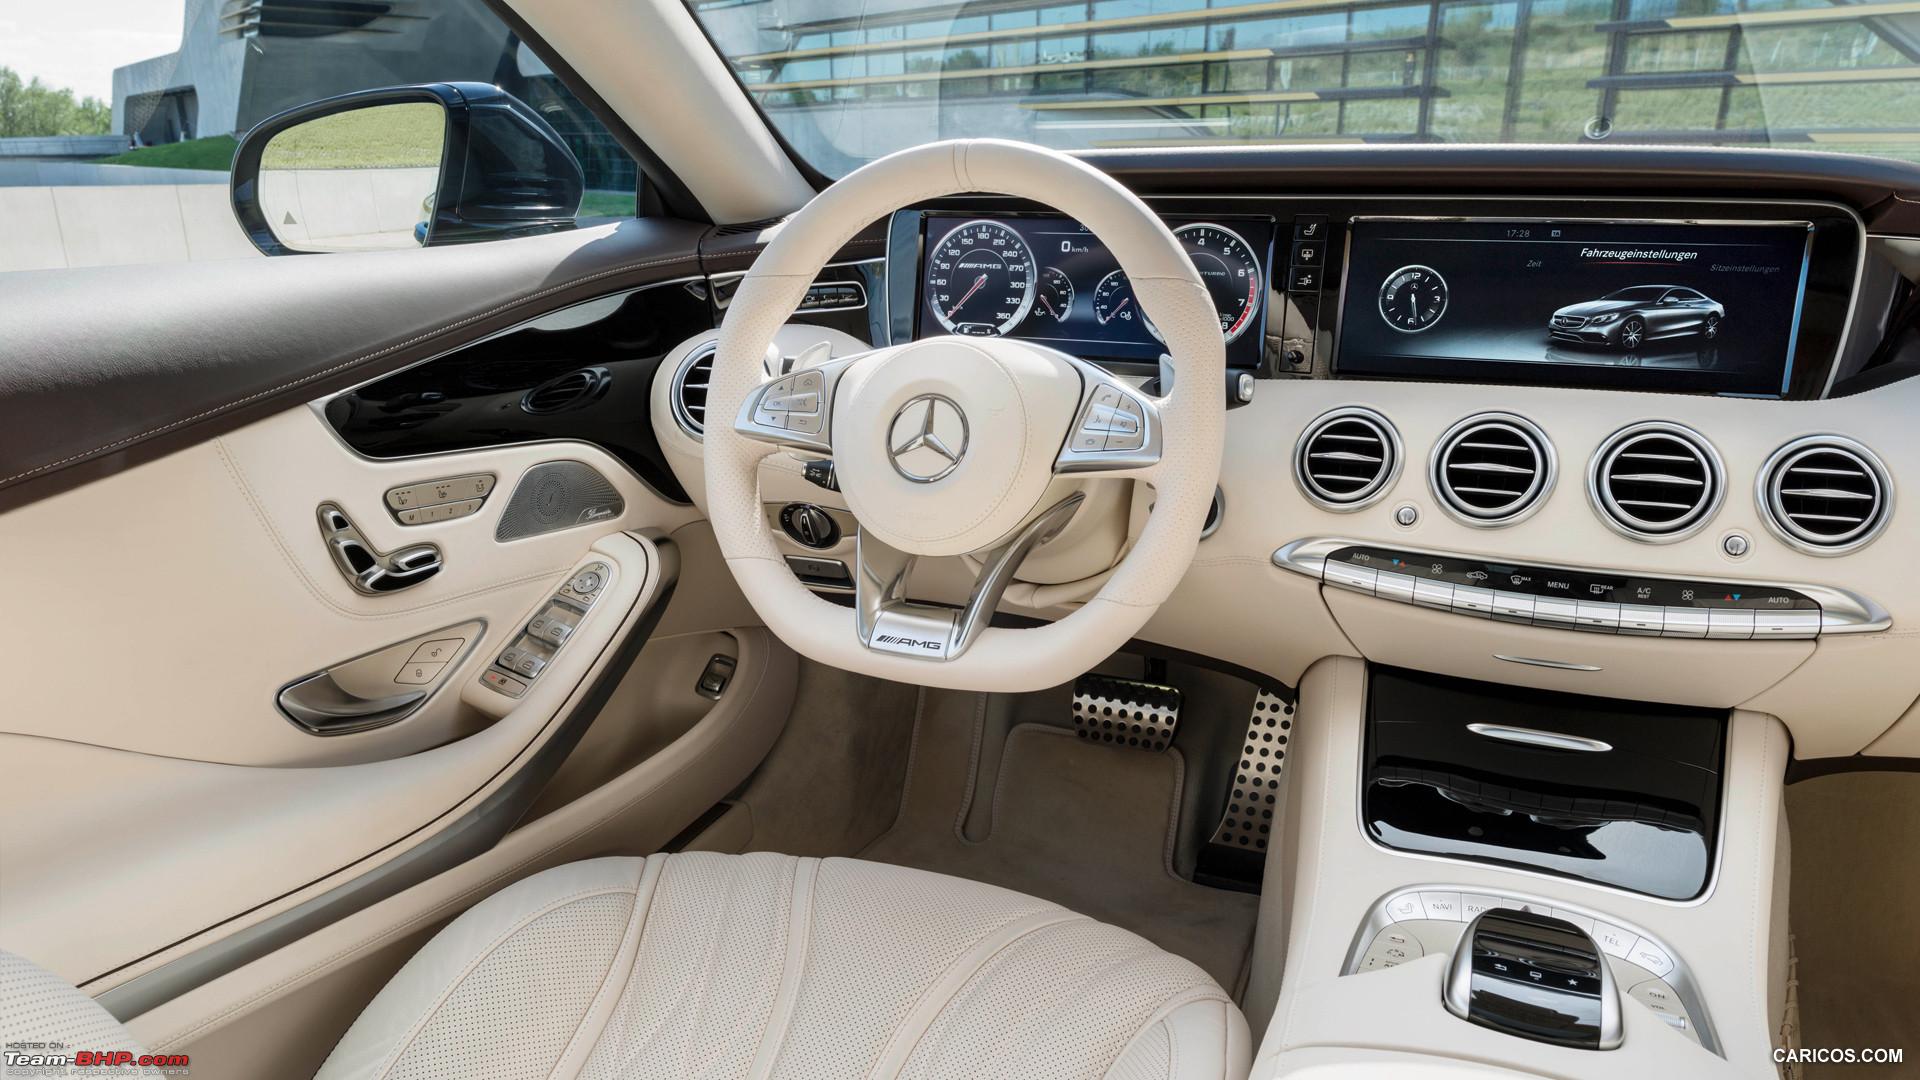 Mercedes Benz S350 Cdi W222 The Best Car In The World